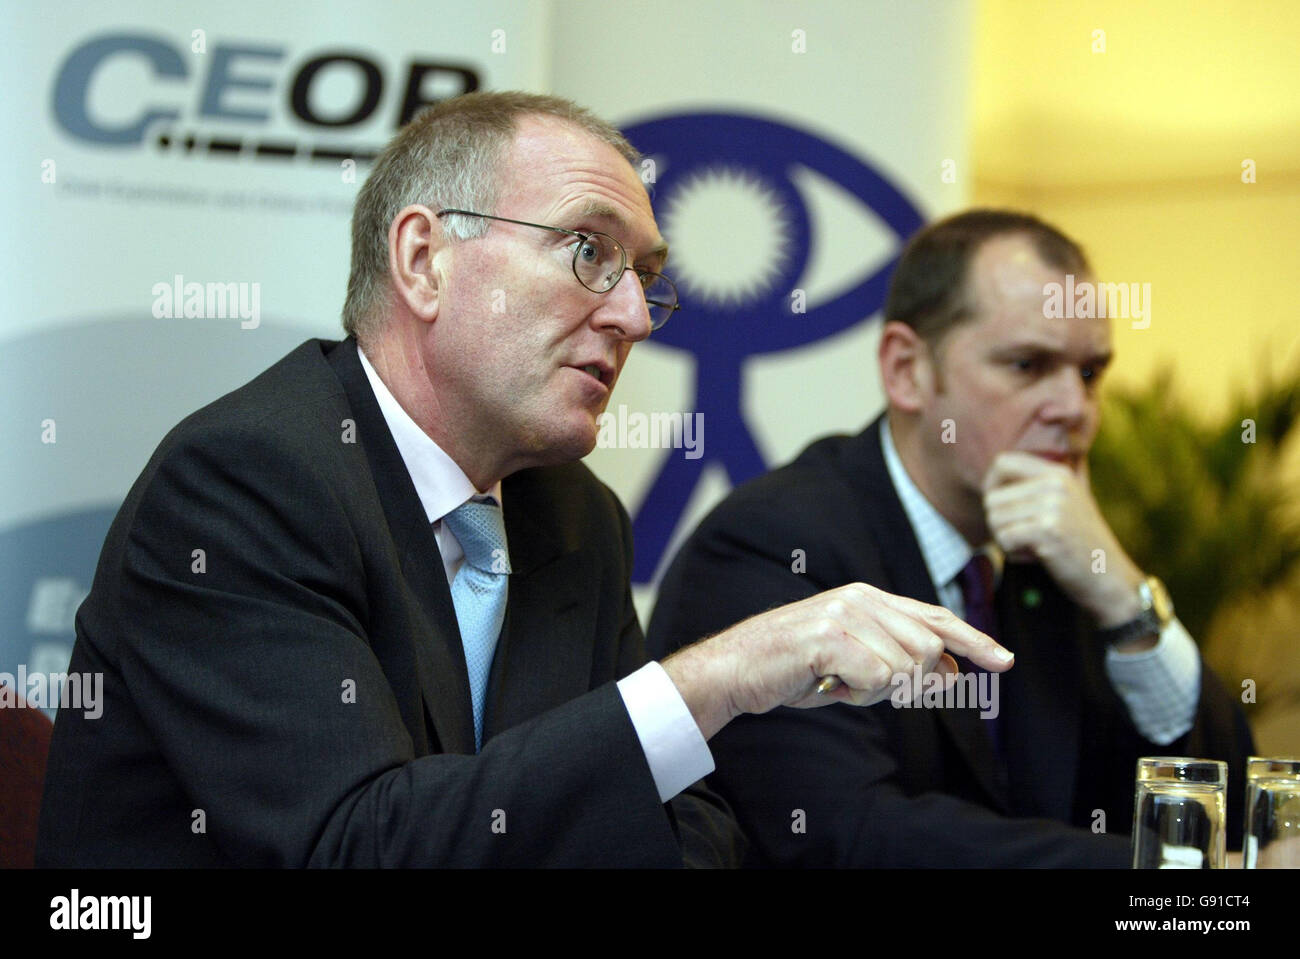 Mr Paul Goggins (left),Home office Minister and Chair of the Goverments Taskforce on child protection on the Internet, with Mr Jim Gamble , deputy director of the National Crime Squad,speaking at a press conference in Belfast,Tuesday 15th November 2005,The world's first centre dedicated to combating the exploitation of children by paedophiles on the internet was announced today.The unit, which will be headed by former Police Service of Northern Ireland Superintendent Jim Gamble, will provide a single point of contact for young people and adults to report online abuse.Up to 100 staff will work Stock Photo